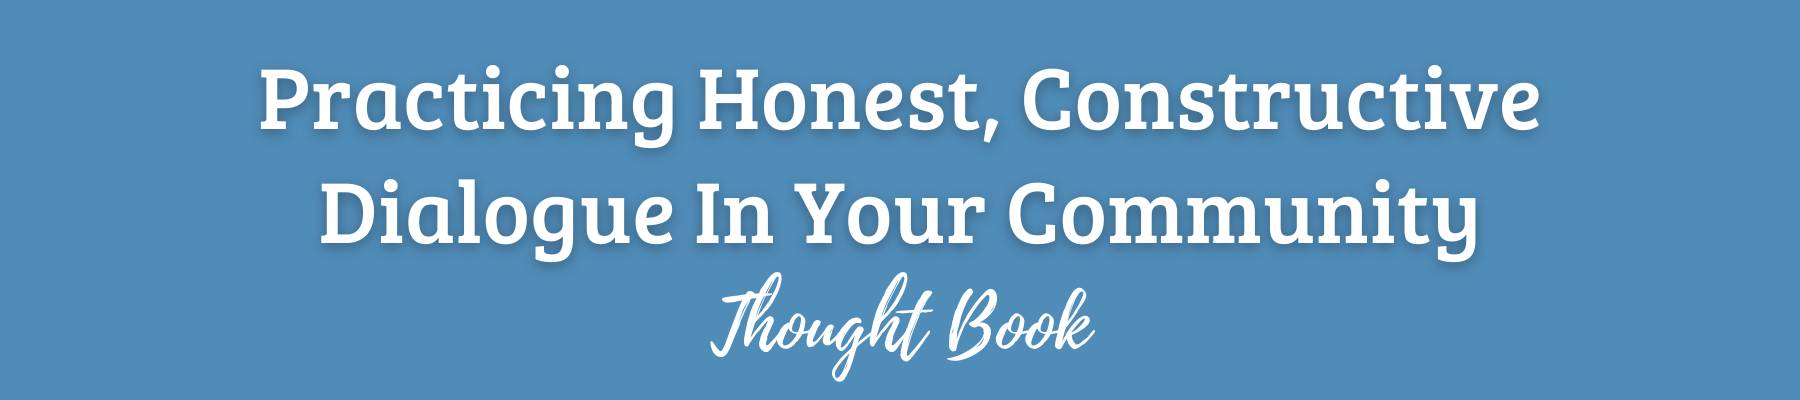 Practicing Honest, Constructive Dialogue In Your Community Thought Book